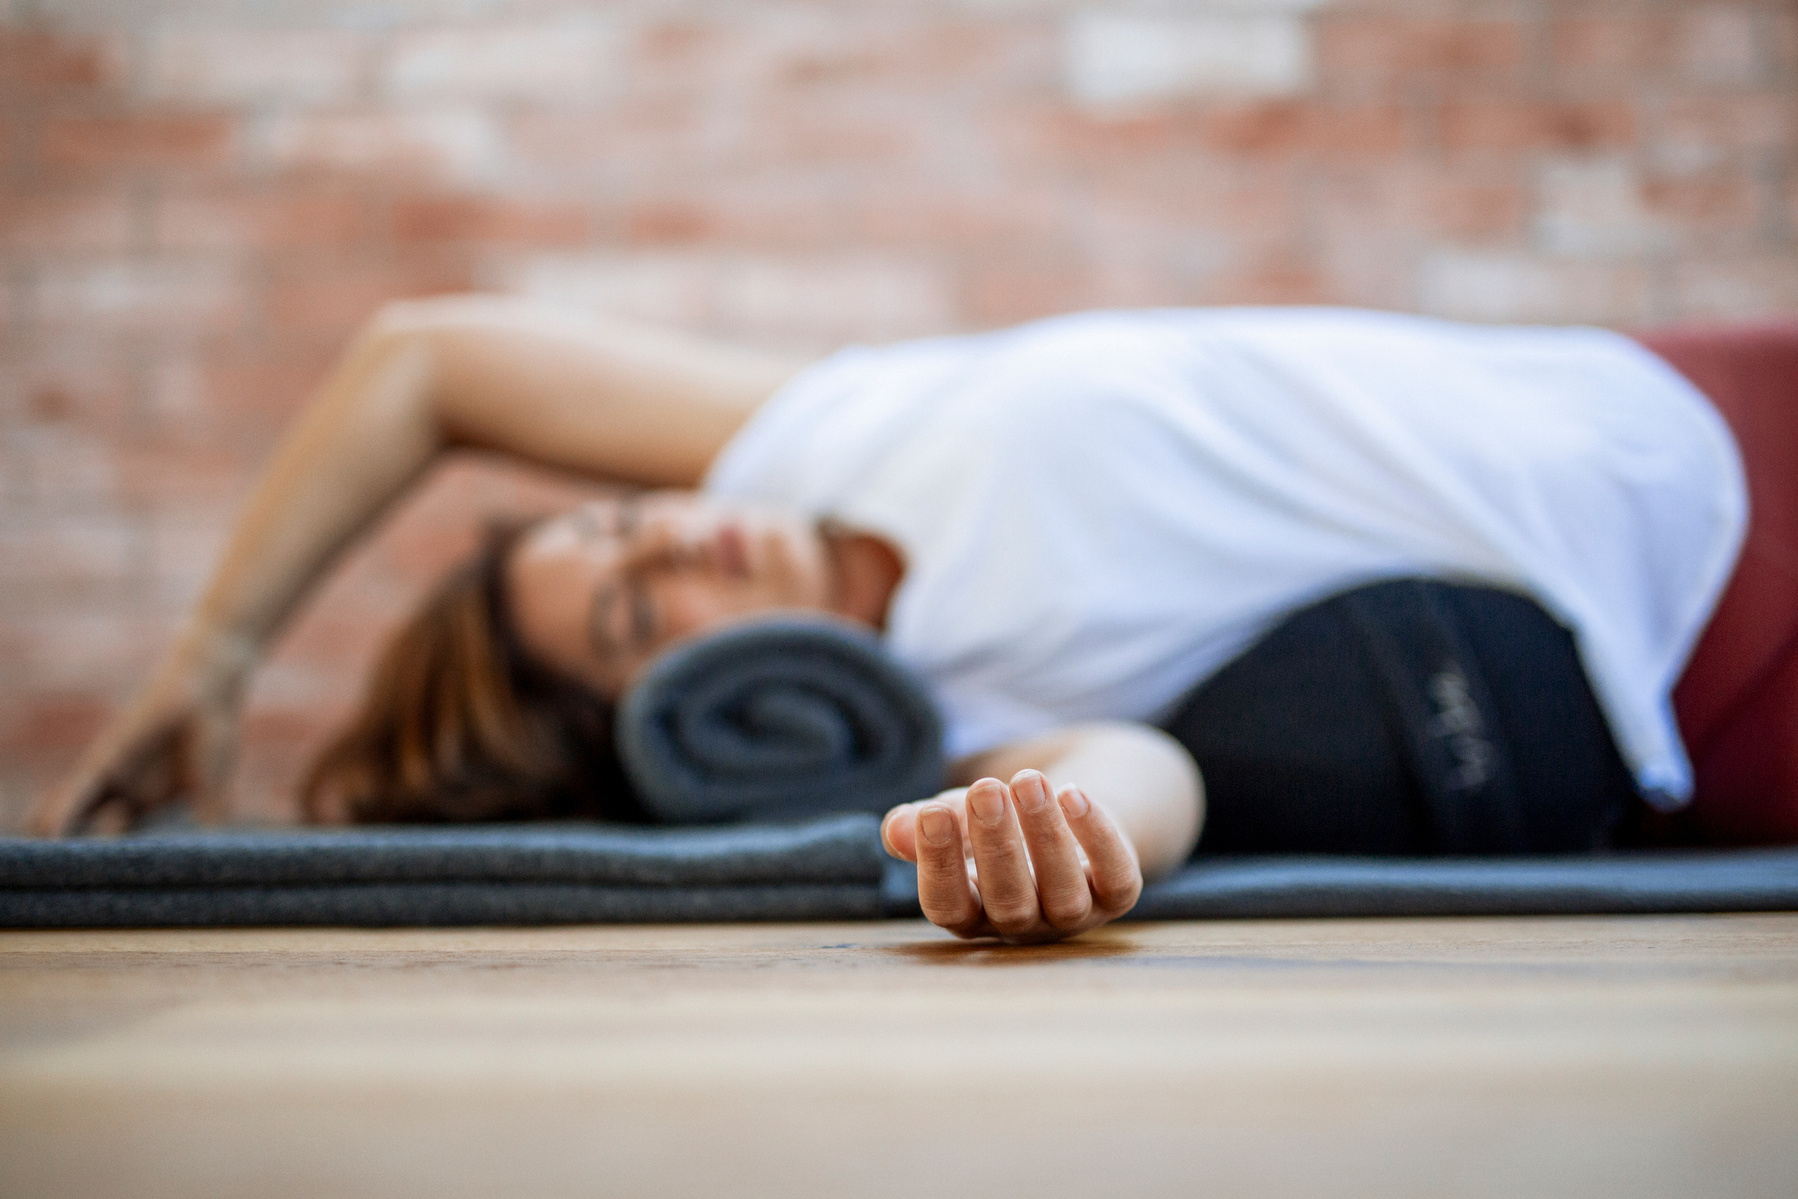 A woman lies on a yoga mat using props to help her stretch, one arm is out straight towards the camera and only her hand is fully in focus